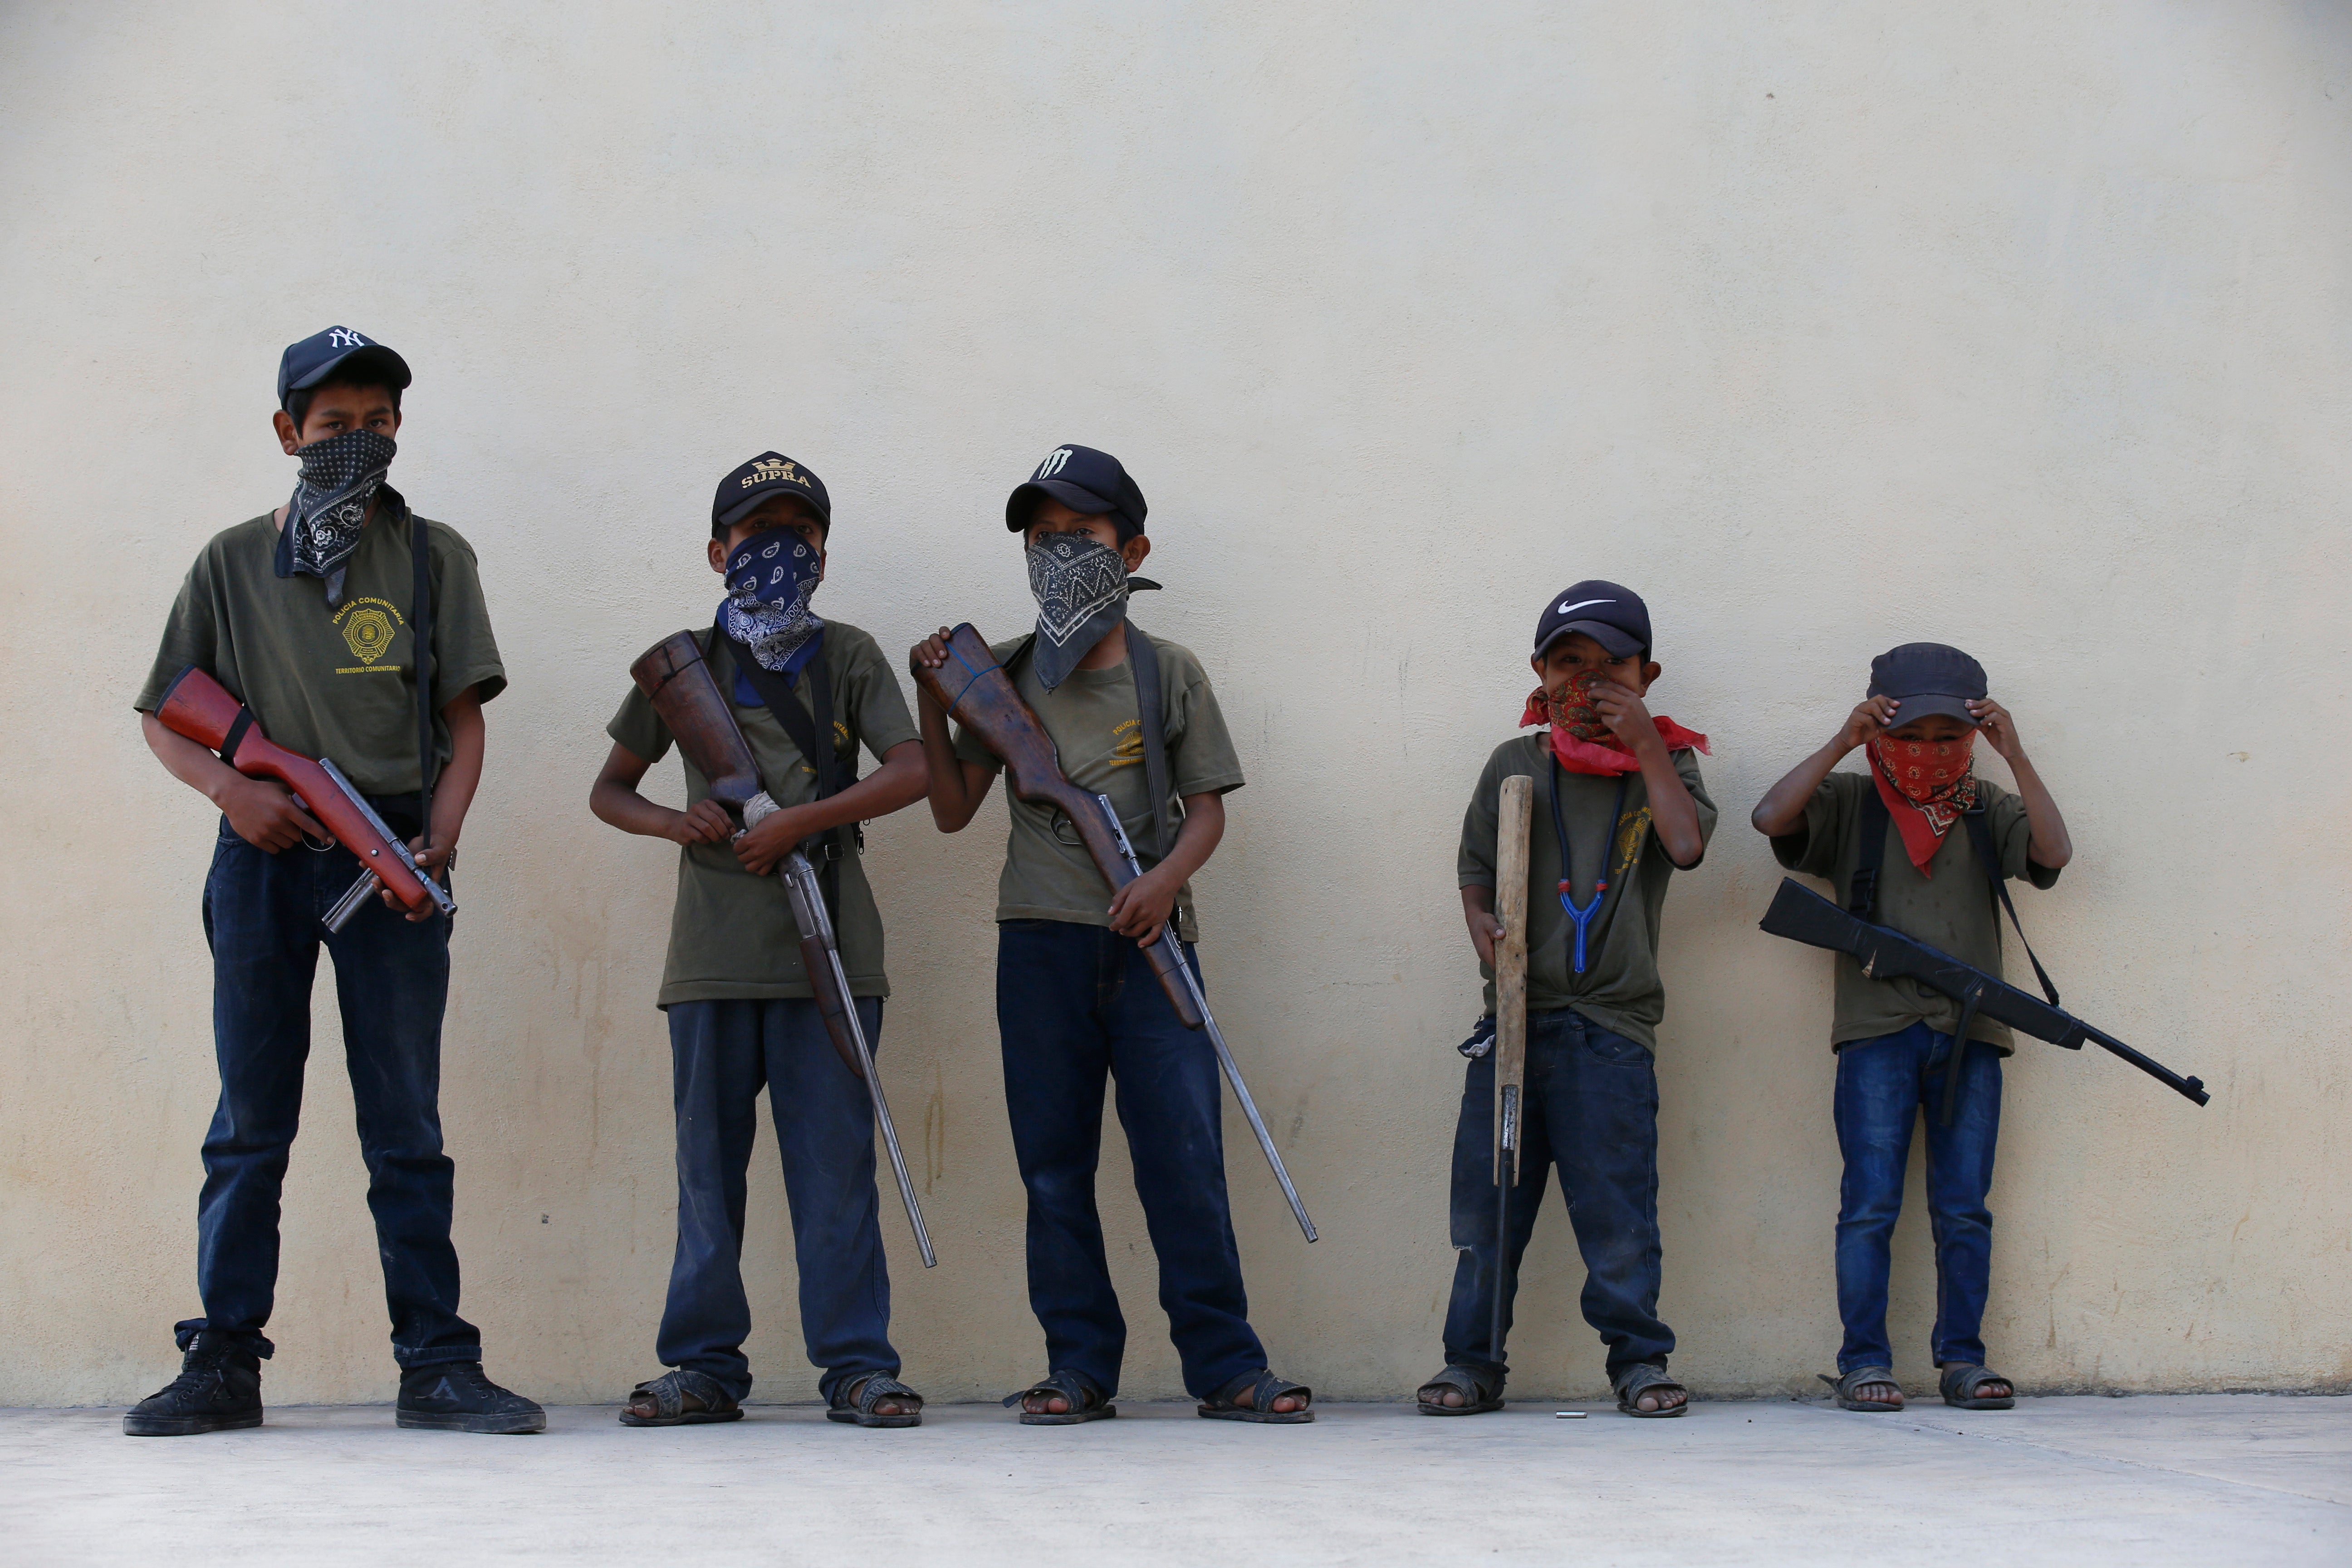 Mexico Armed Children